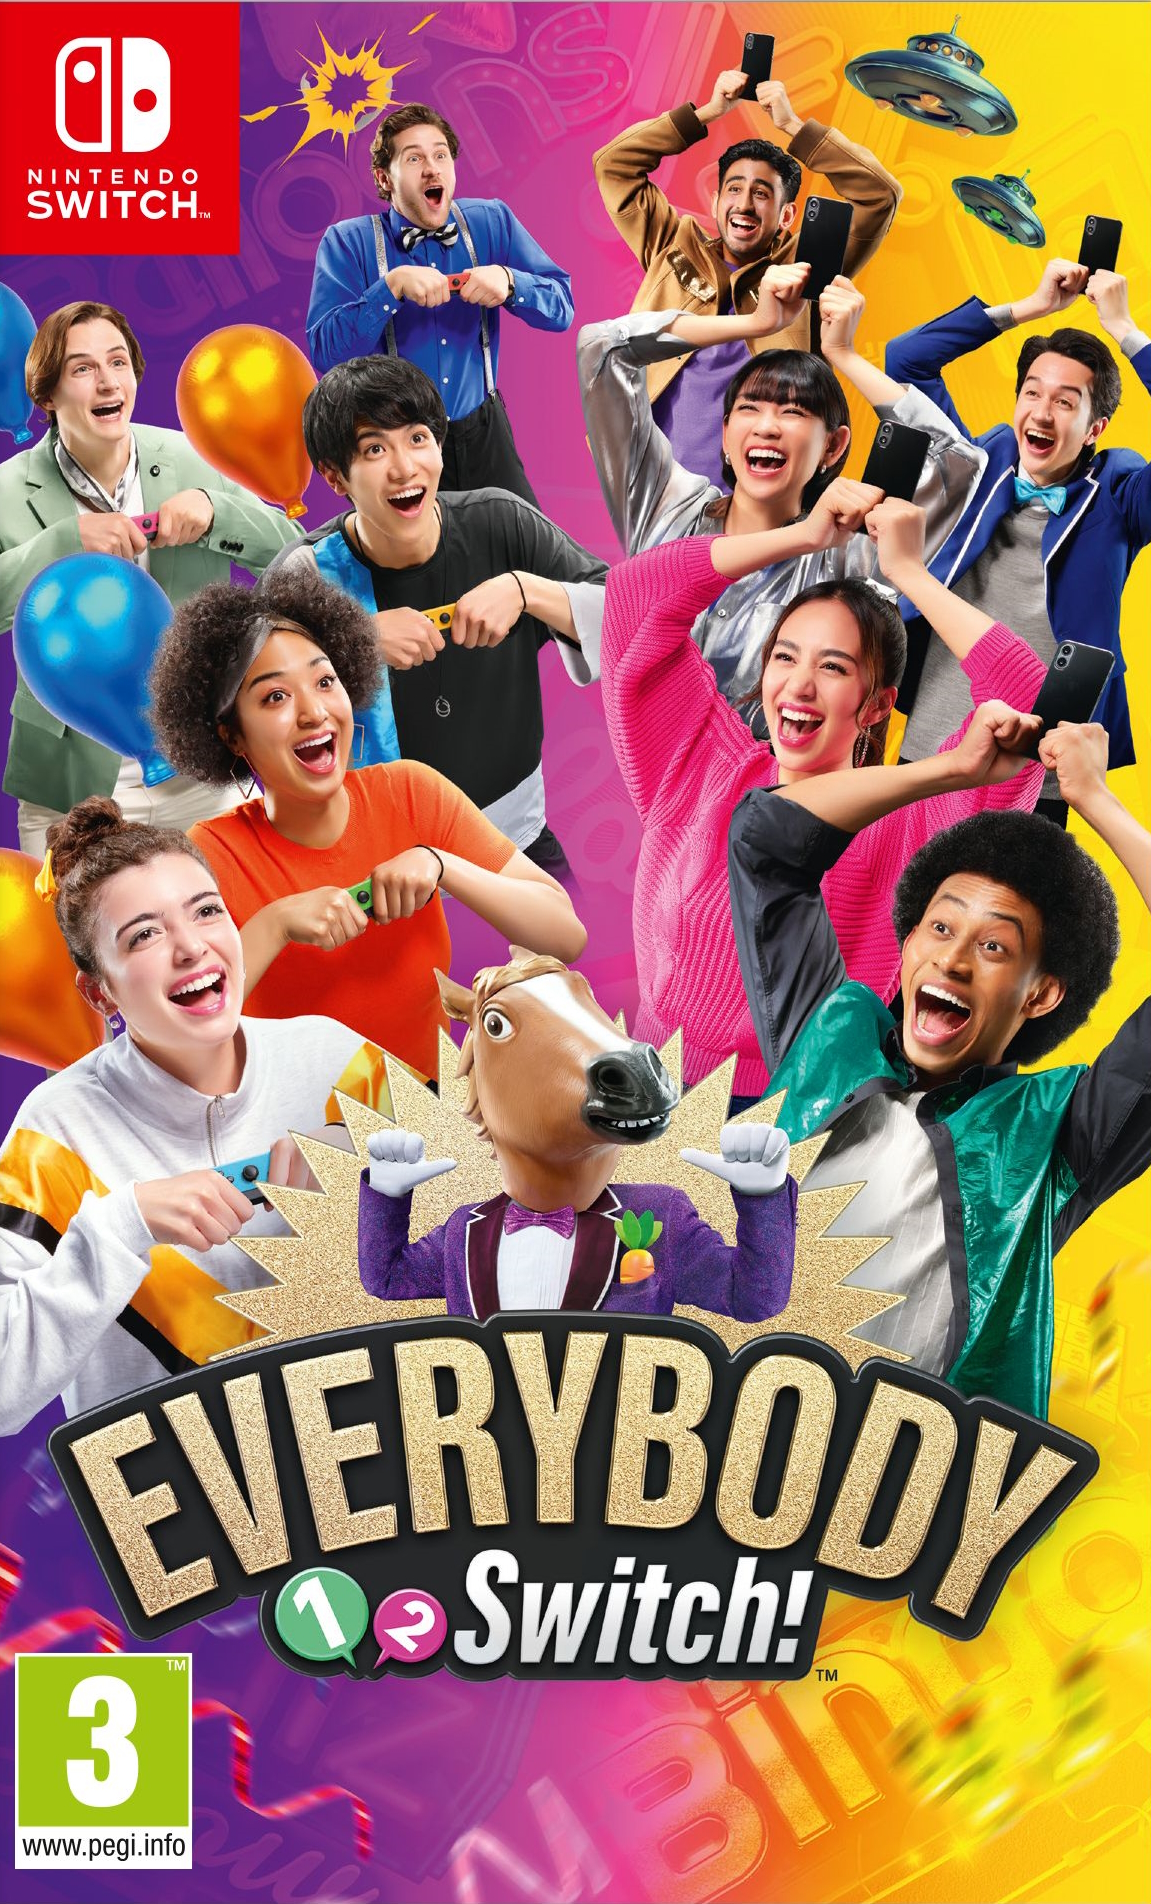 jaquette de Everybody 1-2 Switch sur Switch